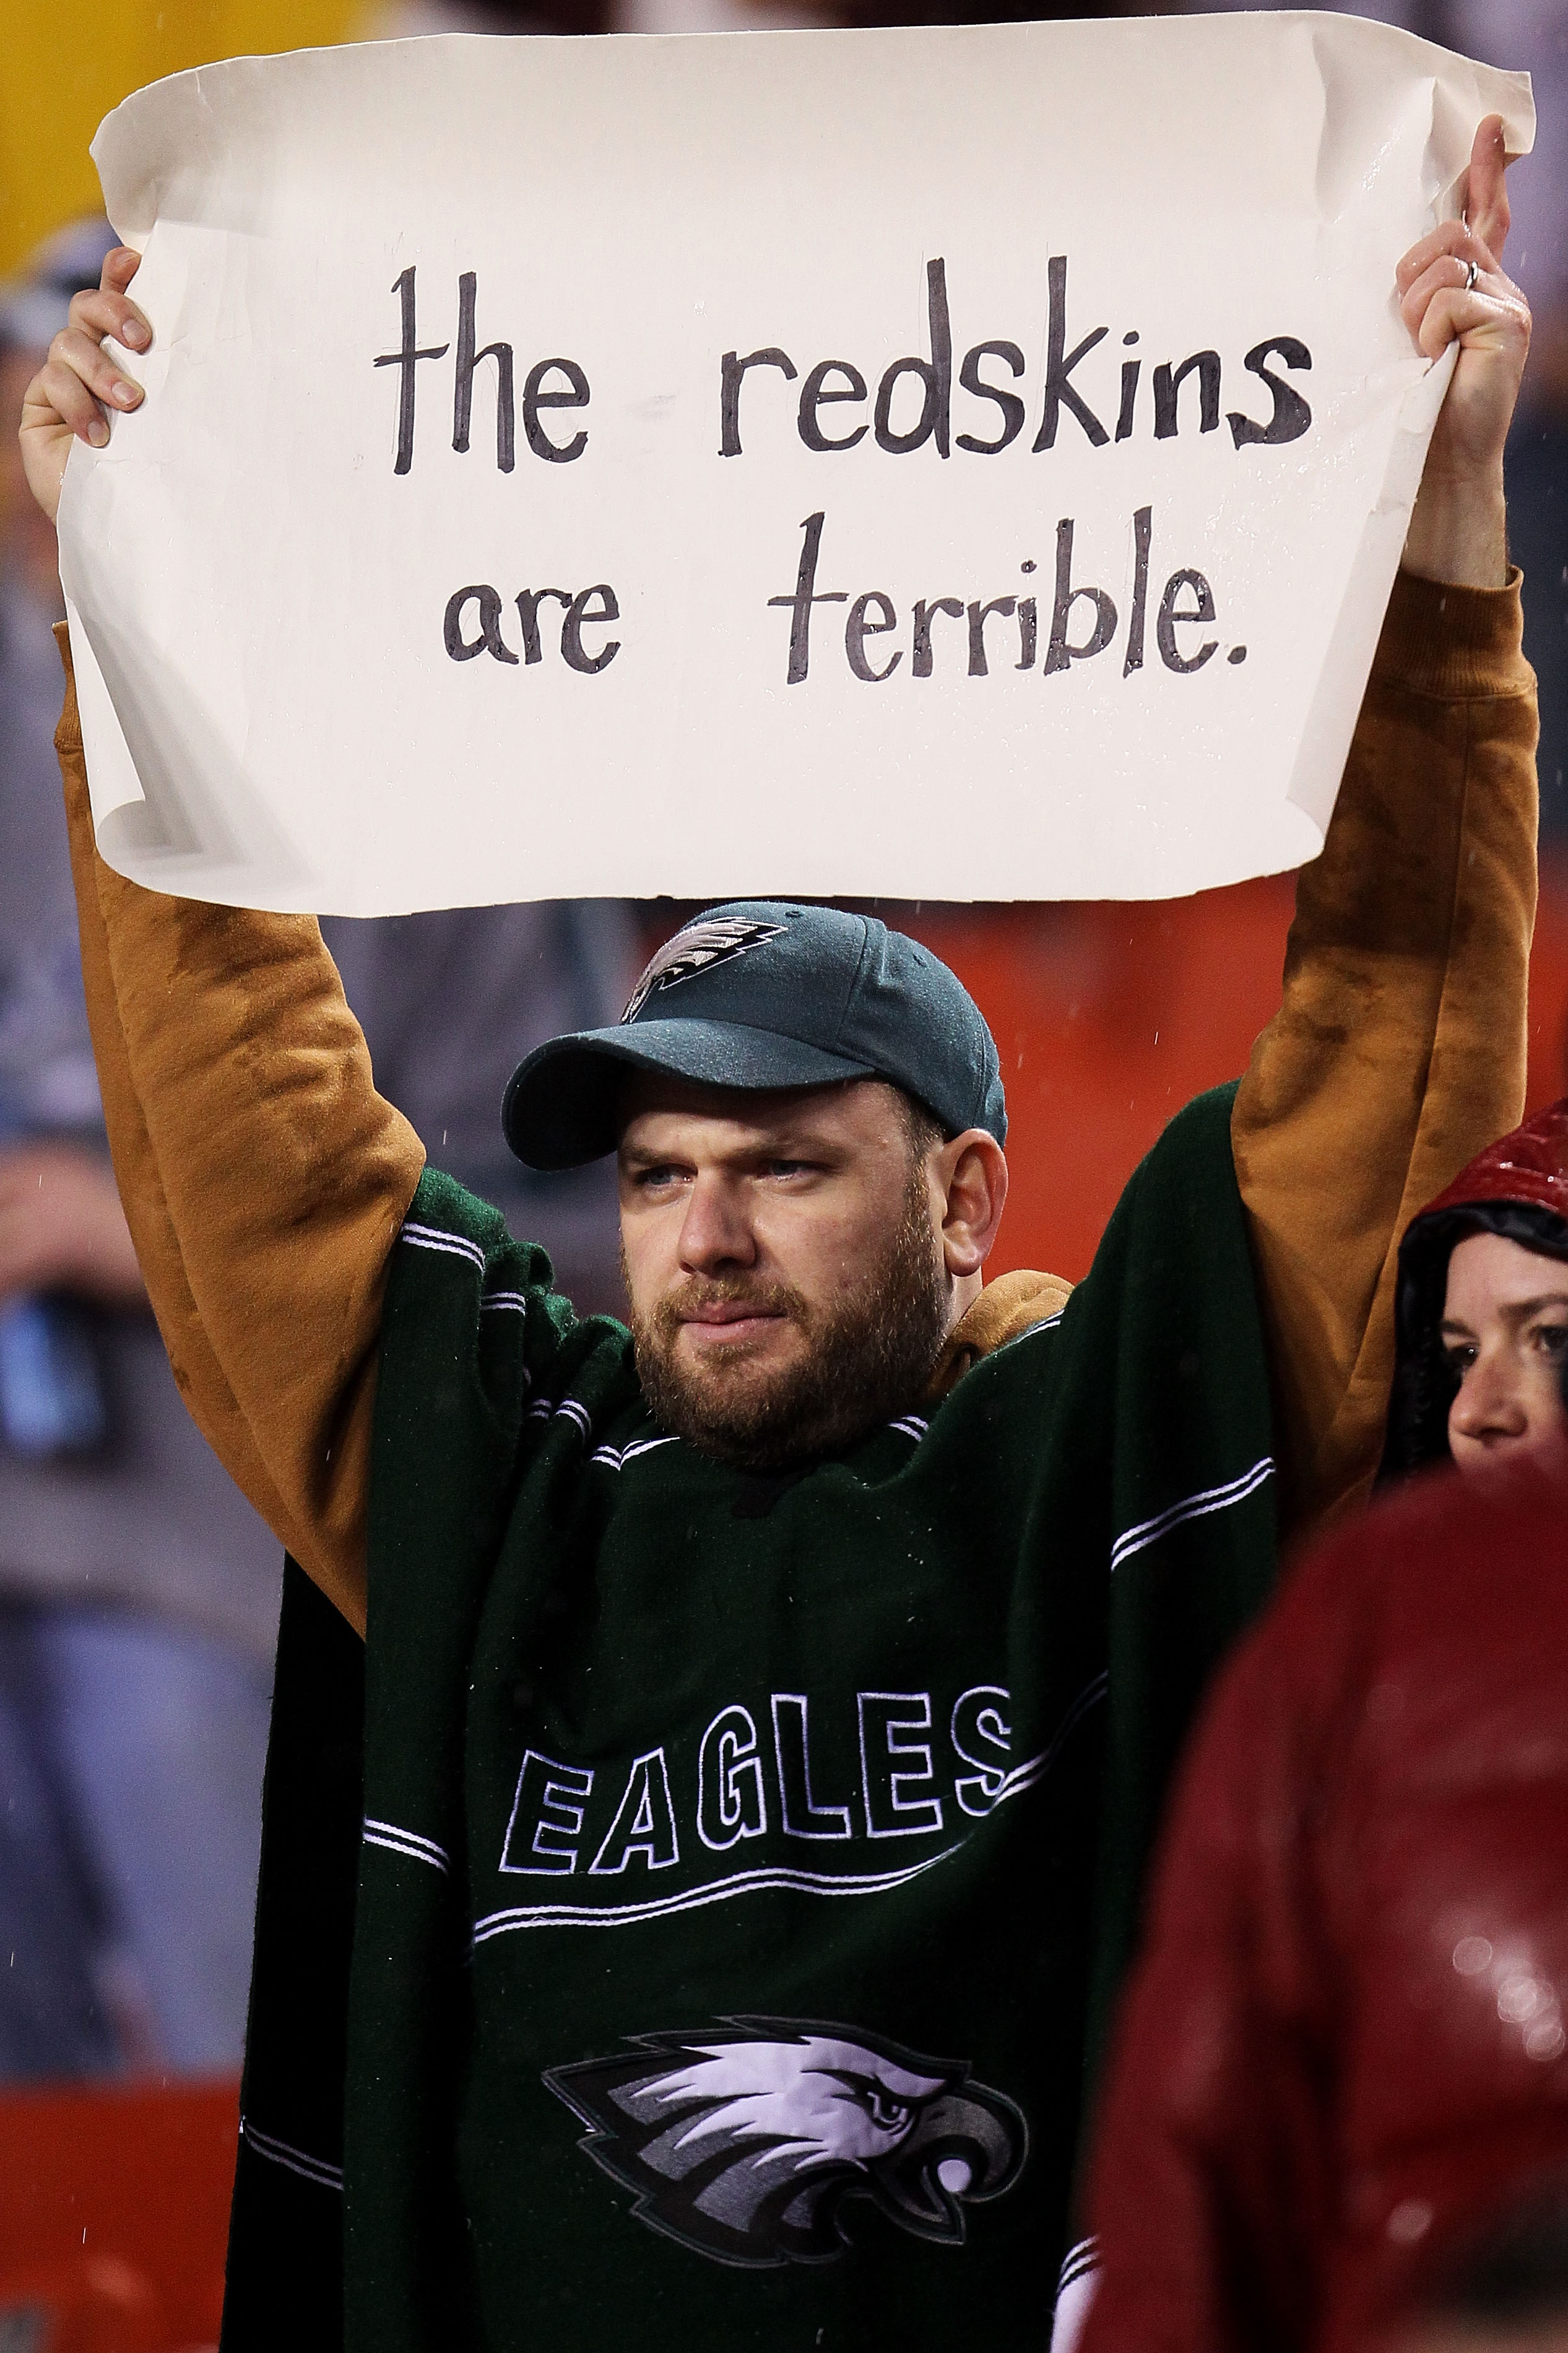 LANDOVER, MD - NOVEMBER 15: A Philadelphia fan holds up a sign during the game between the Washington Redskins and the Philadelphia Eagles on November 15, 2010 at FedExField in Landover, Maryland.  (Photo by Chris McGrath/Getty Images)